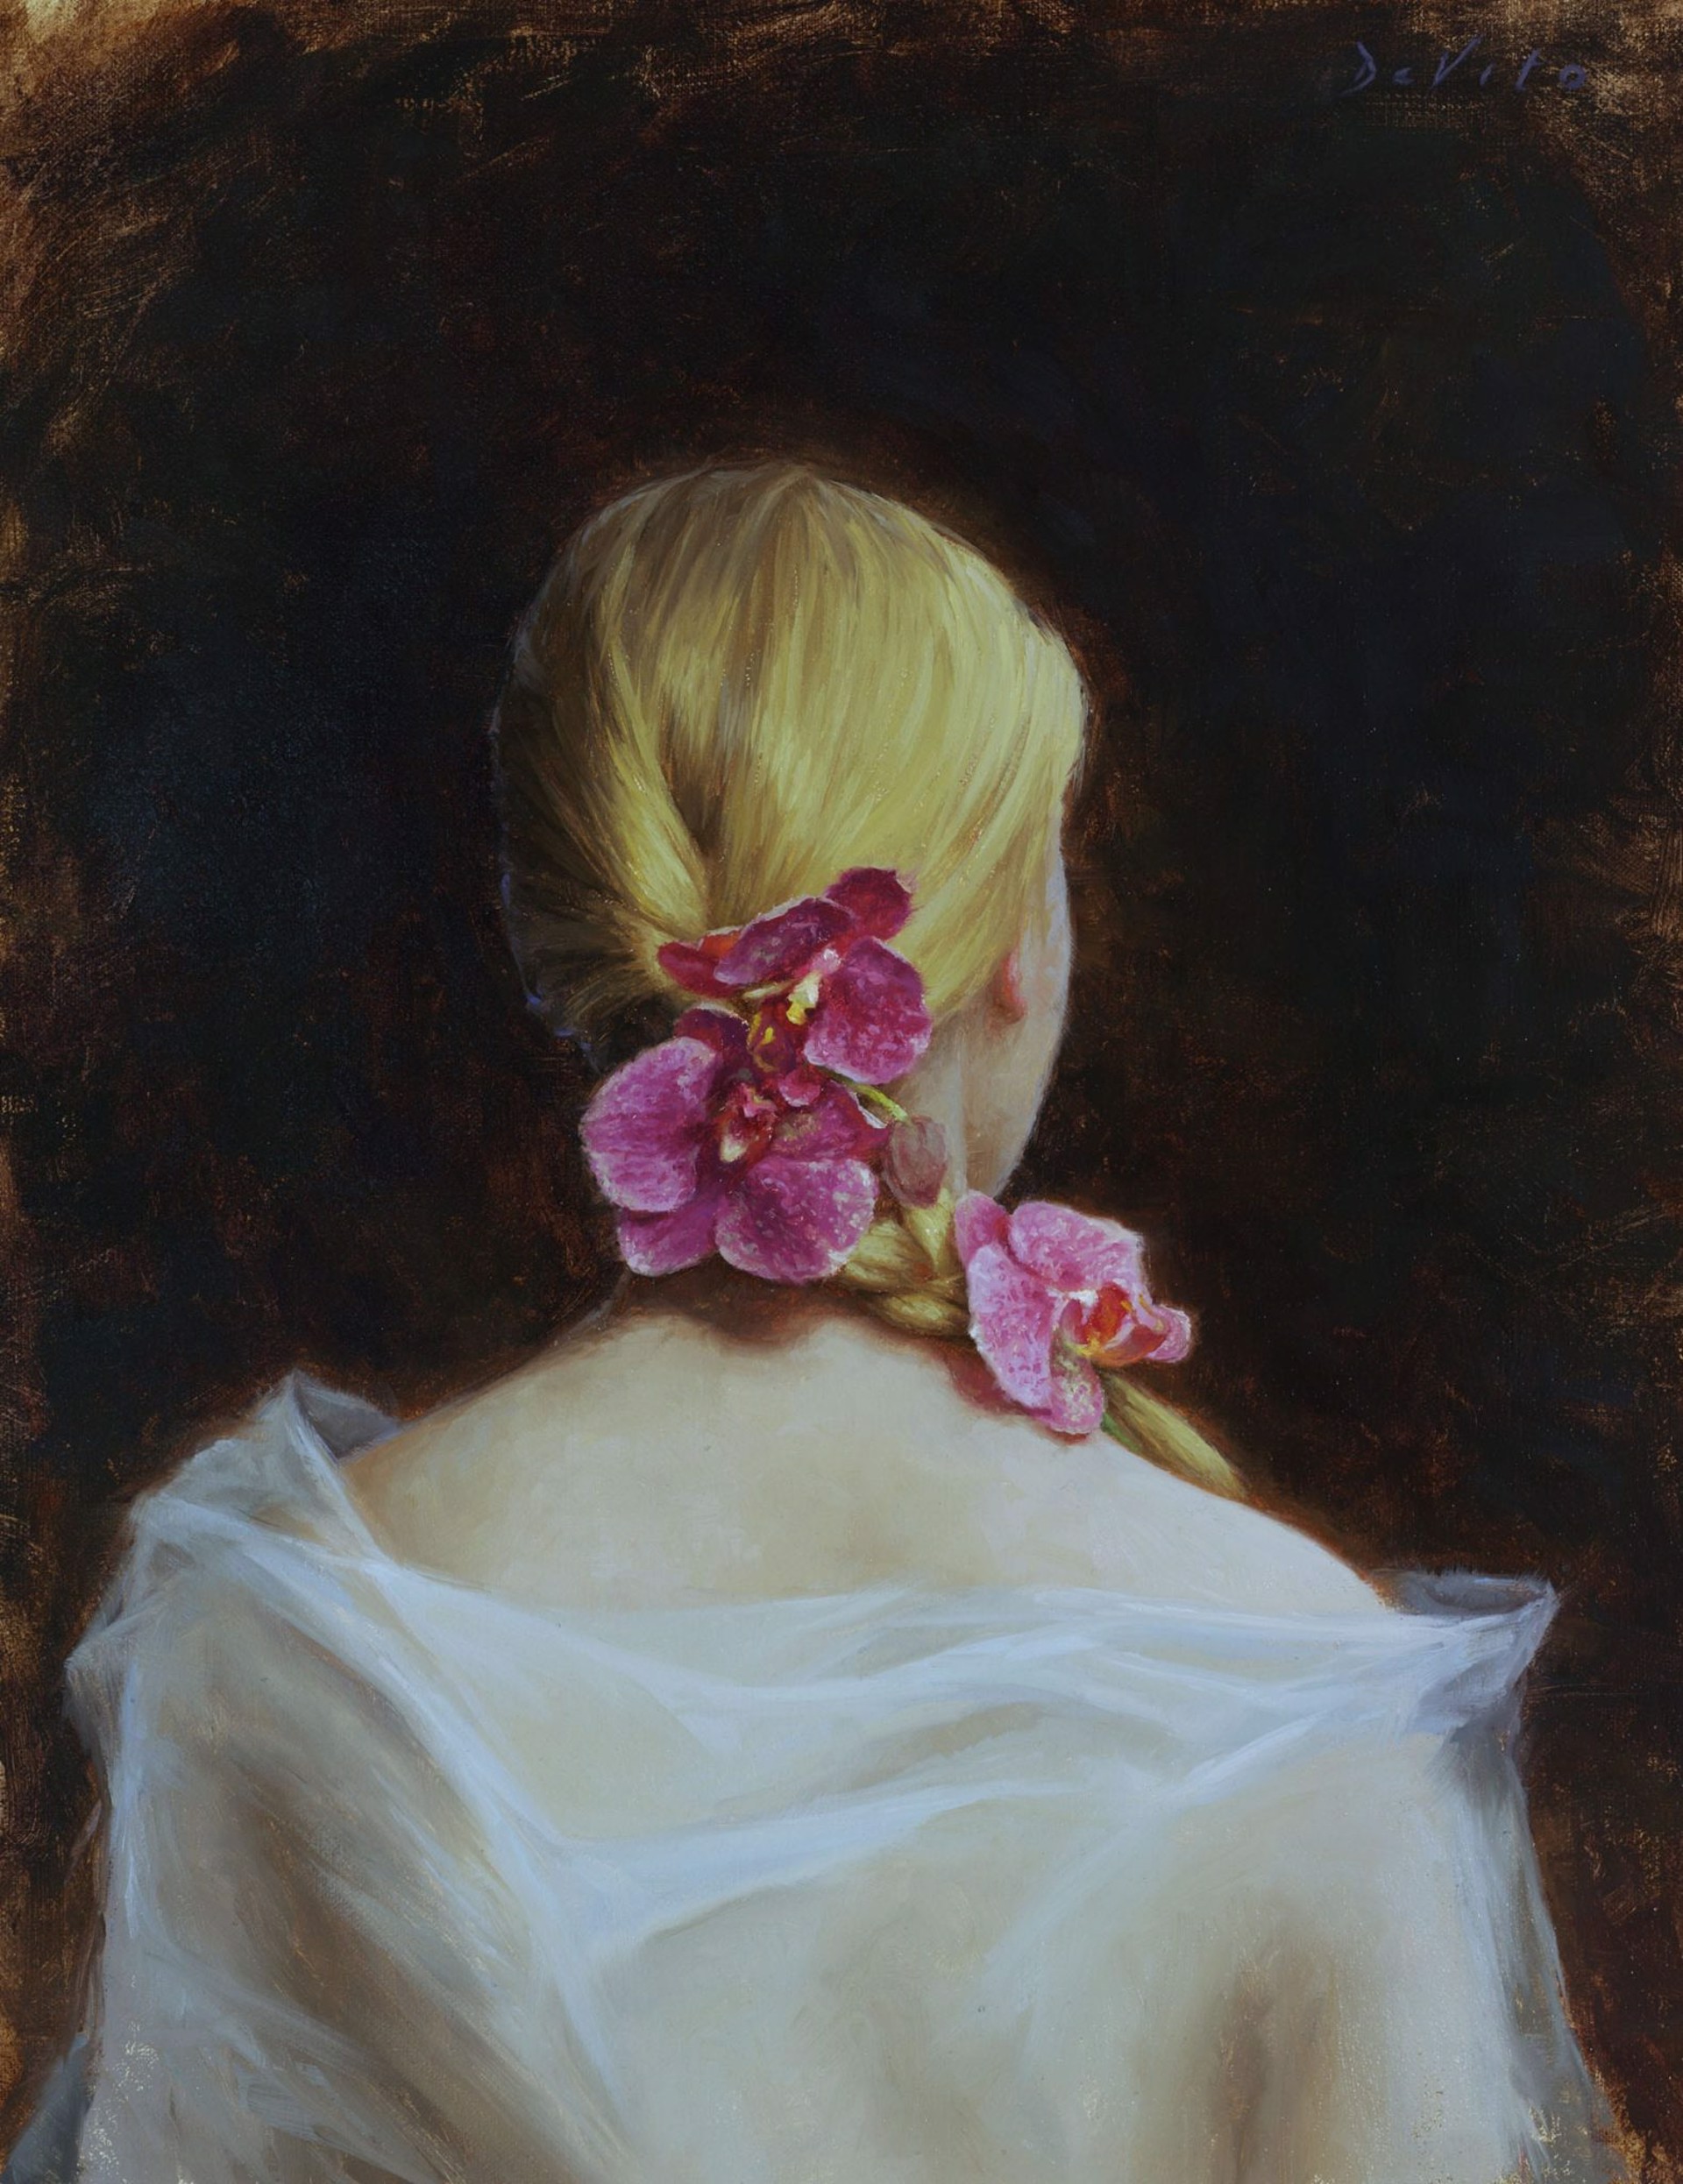 Braid With Purple Orchids by Grace Devito